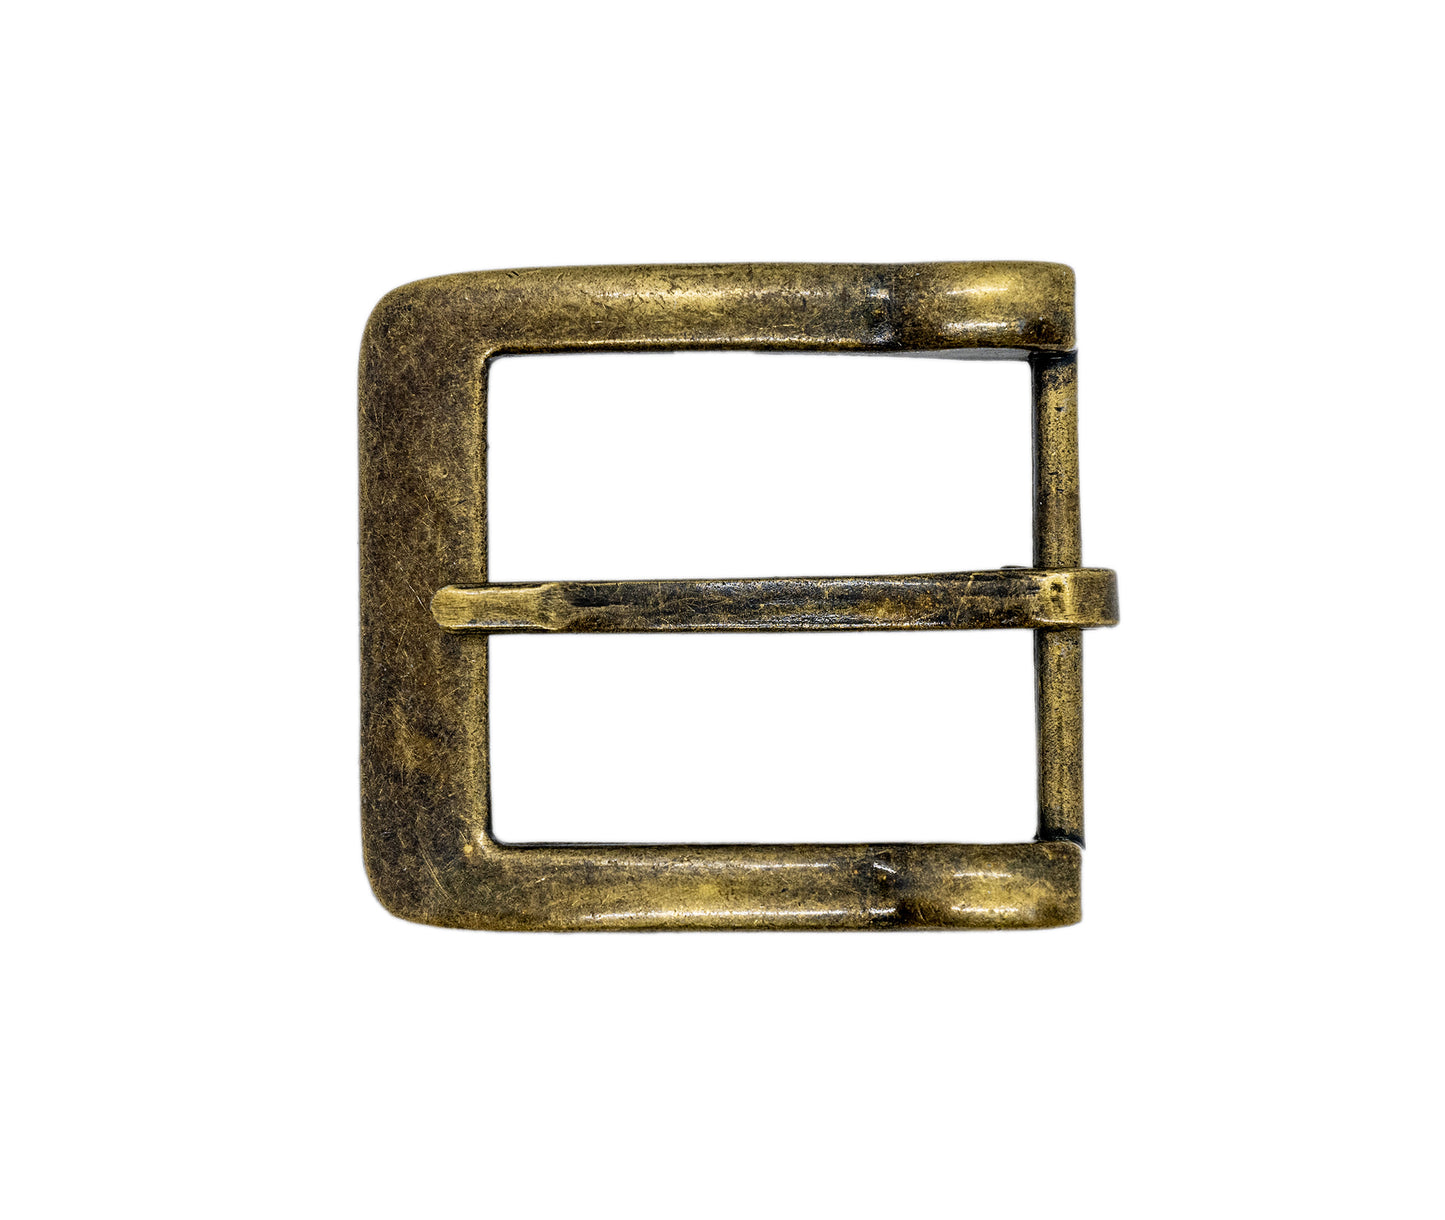 TBS-P5015 - Bronze Finish Pin Buckle for 1 1/2" Belts